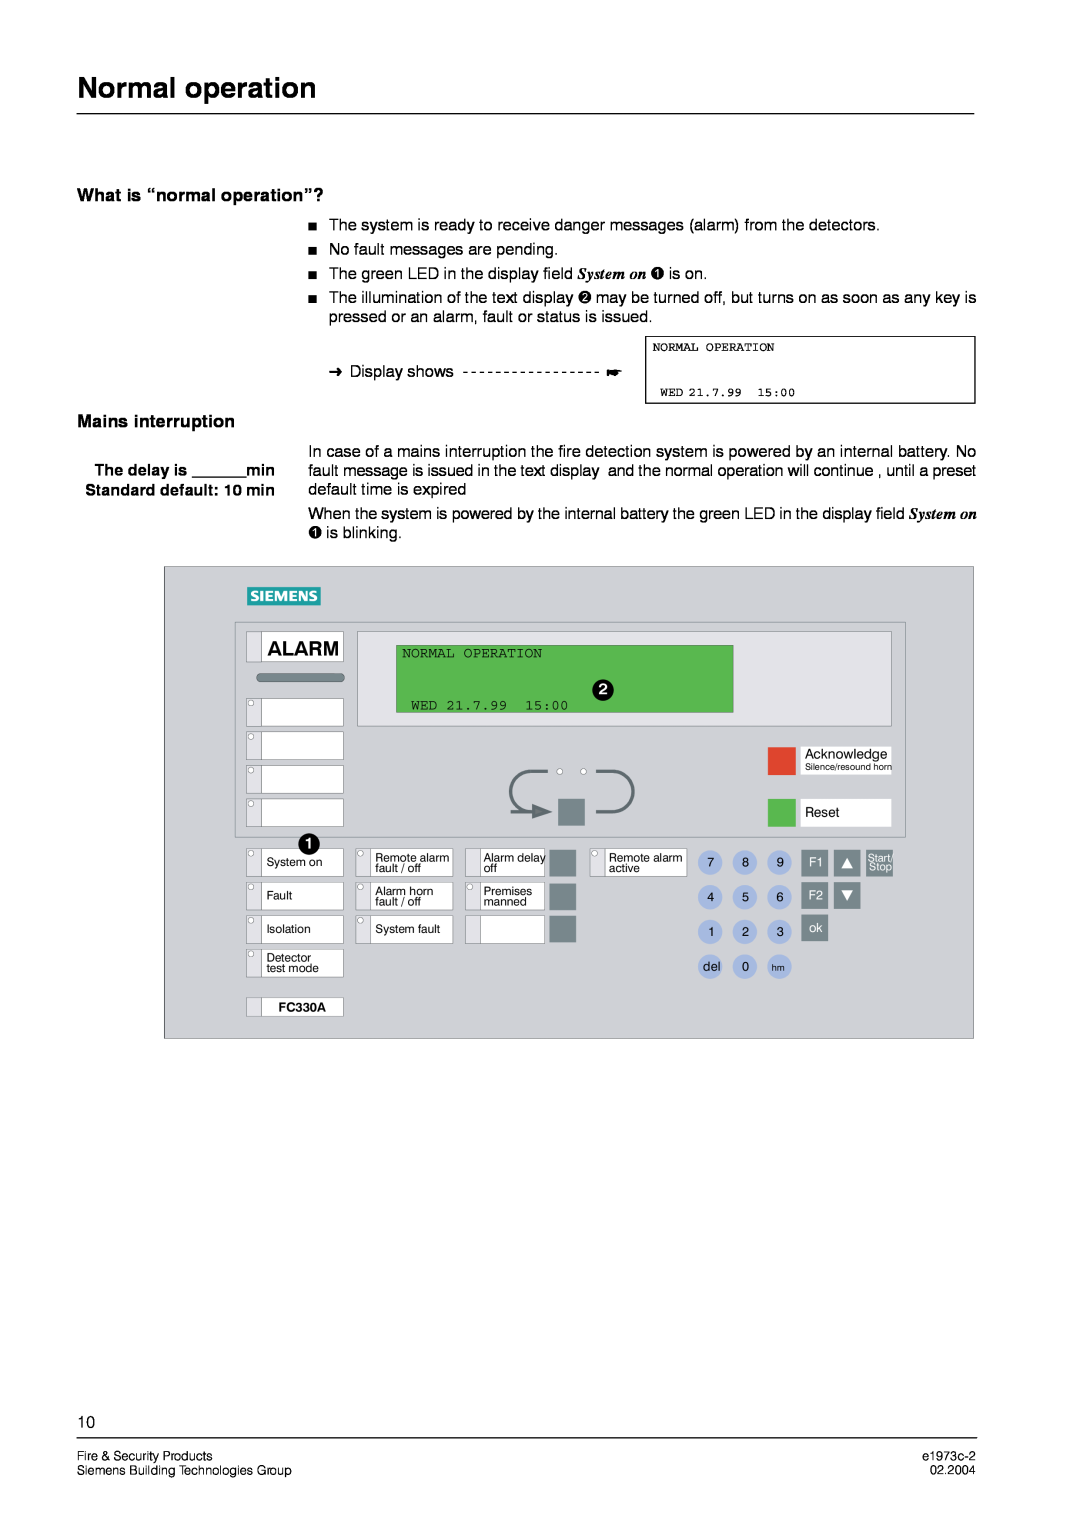 Siemens FC330A manual Normal operation, Alarm, What is “normal operation”?, Mains interruption 